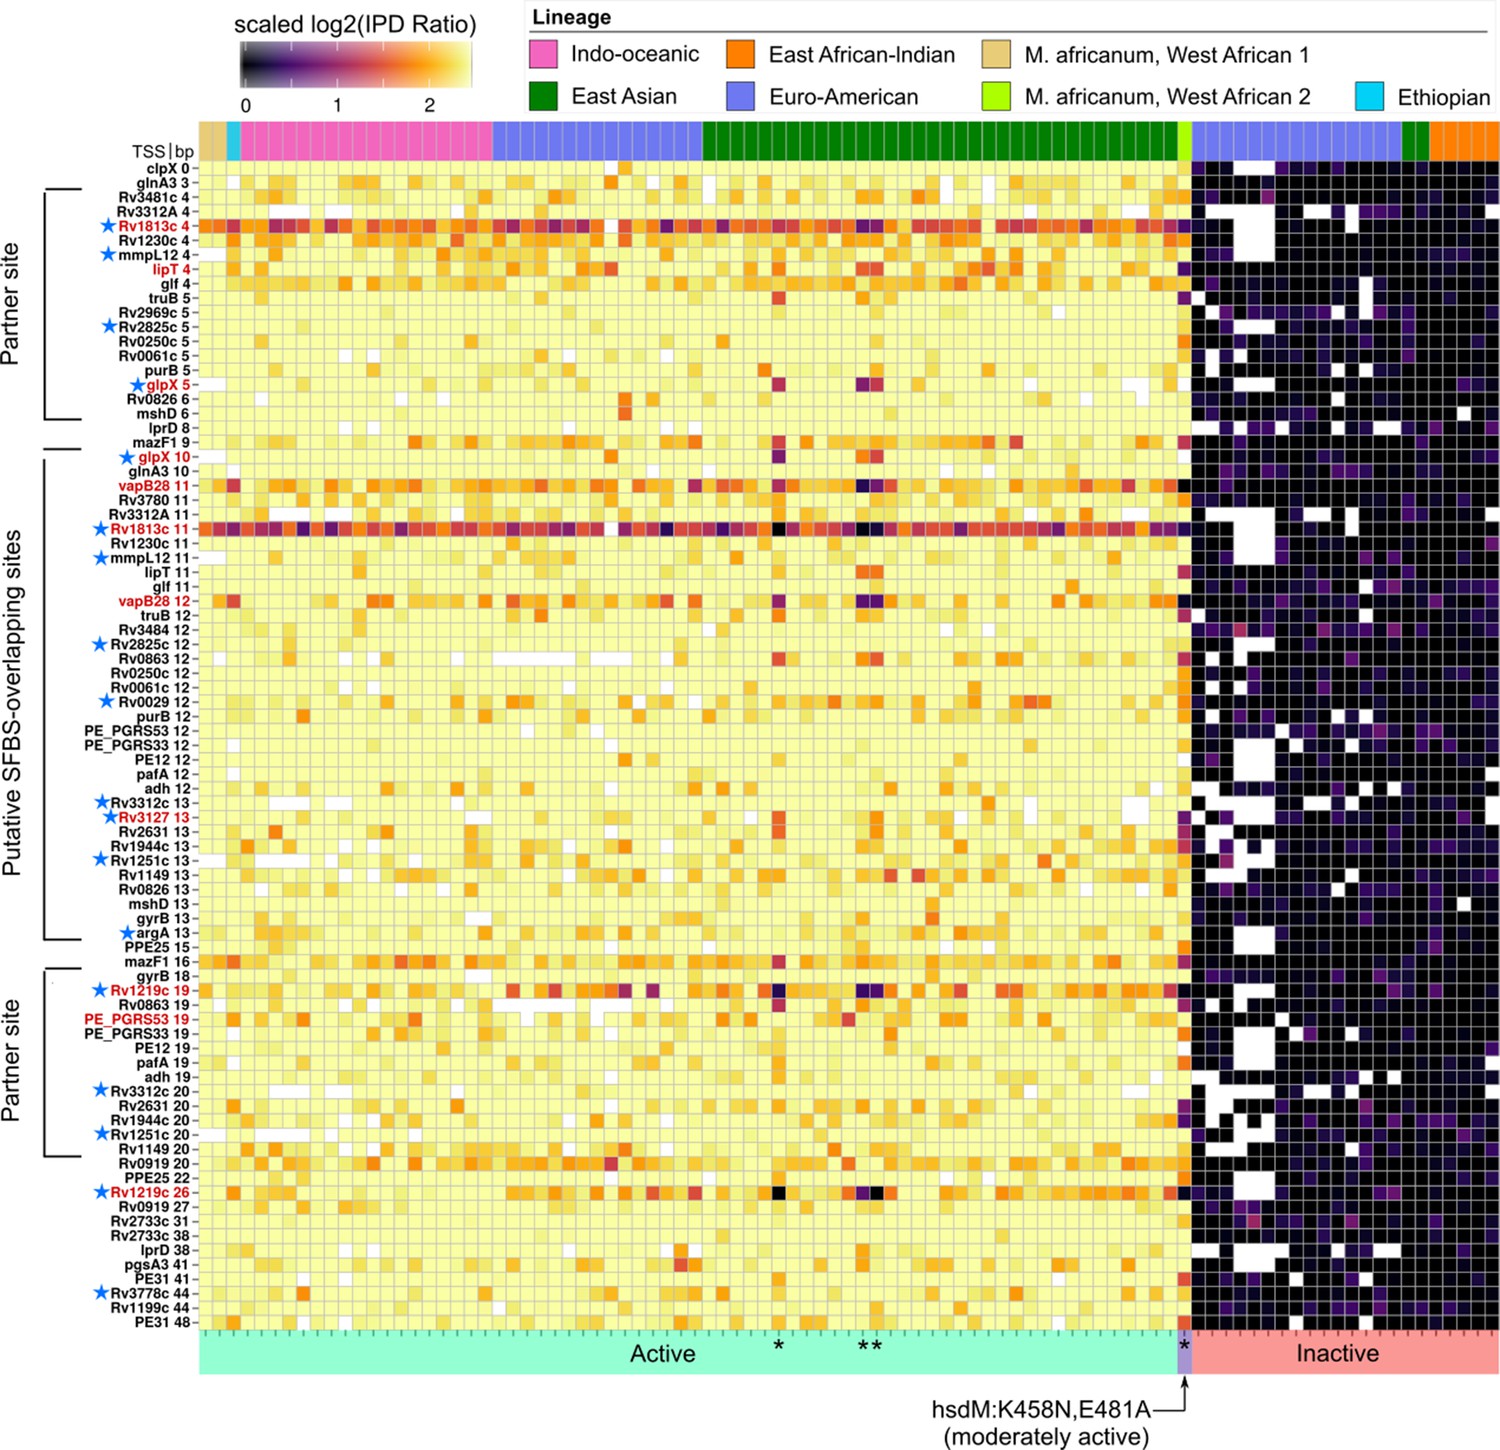 Drivers And Sites Of Diversity In The Dna Adenine Methylomes Of 93 Mycobacterium Tuberculosis Complex Clinical Isolates Elife